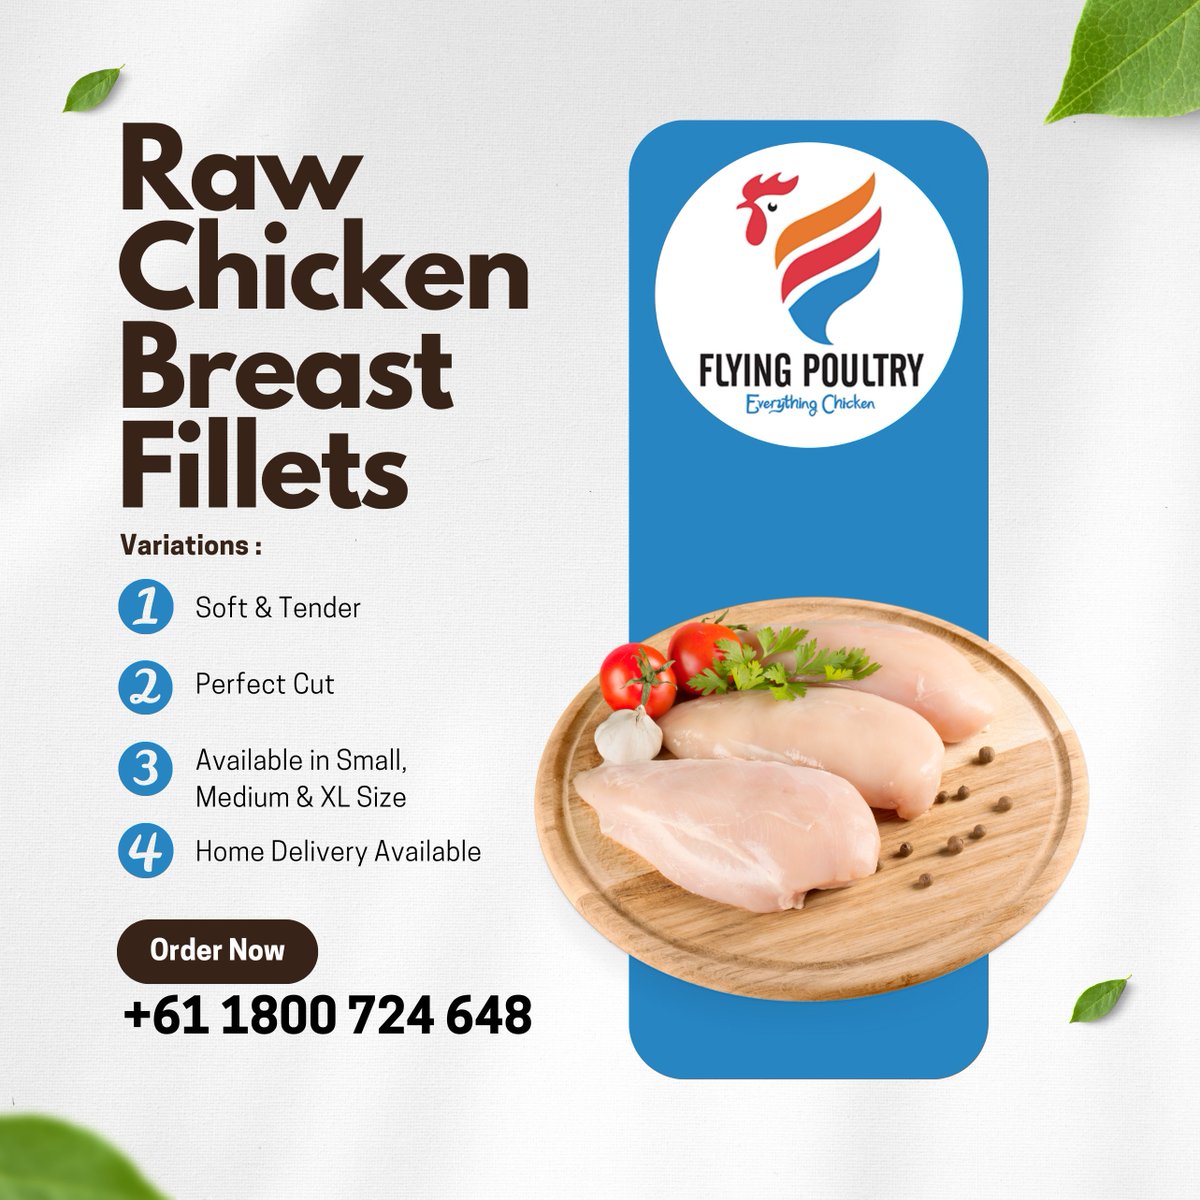 Amazing Chicken Offers Just For You! 🍗 Chicken Breast Fillet (Skin Off) 3 Kg - Only $30.6 🍗 Chicken Breast Fillet (Skin ON) 3 Kg - Just $28.50 Shop now and stock up on premium chicken for your delightful meals. Click here to order: rb.gy/cz037 #viral #TrendingNow